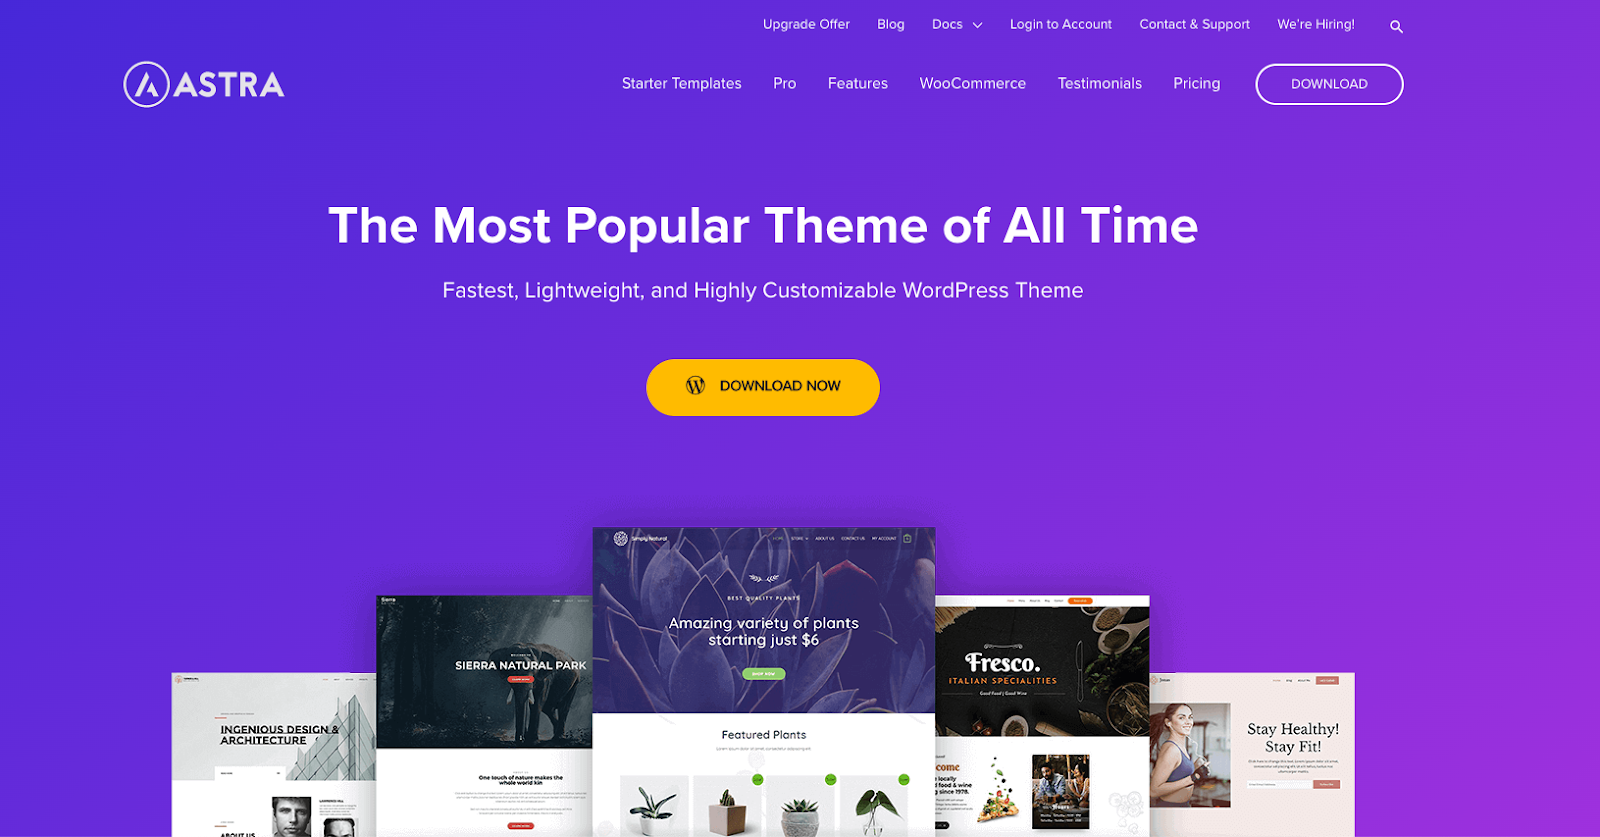 Astra is a WordPress theme with powerful features and beautiful design elements